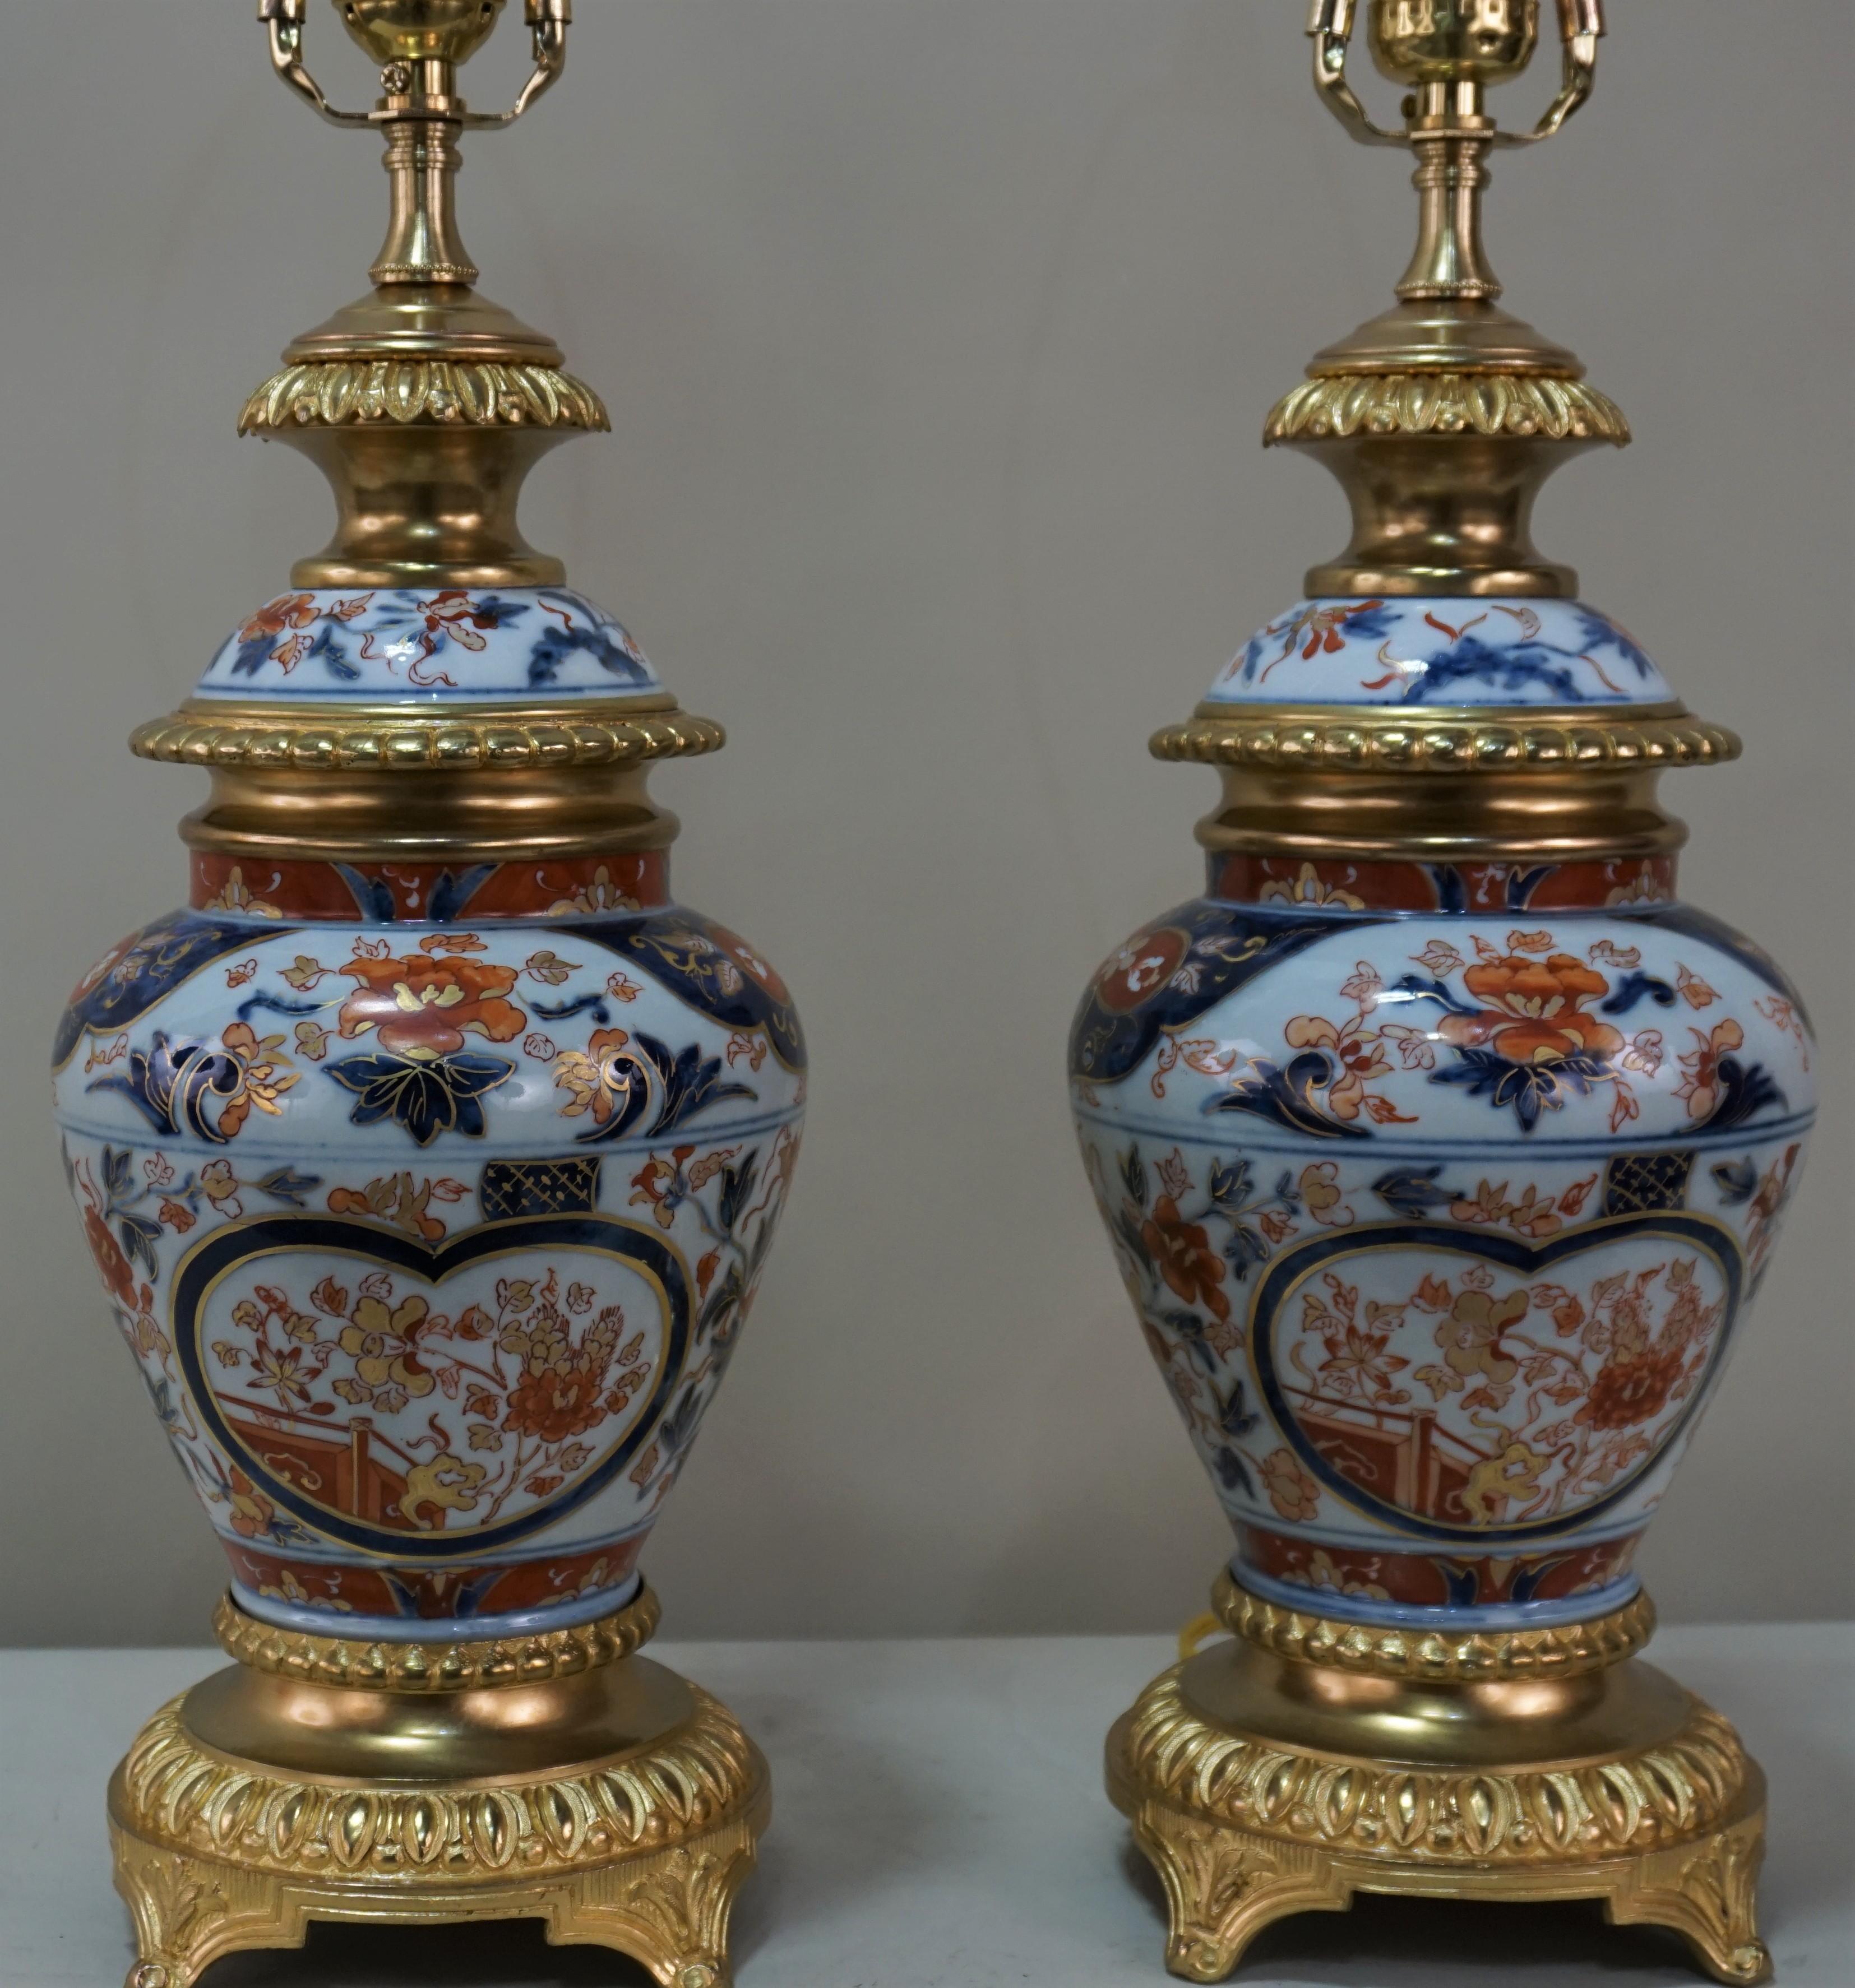 Pair of Japanese porcelain with bronze doré mounting table lamps. Professionally electrified and fitted with silk lampshades.